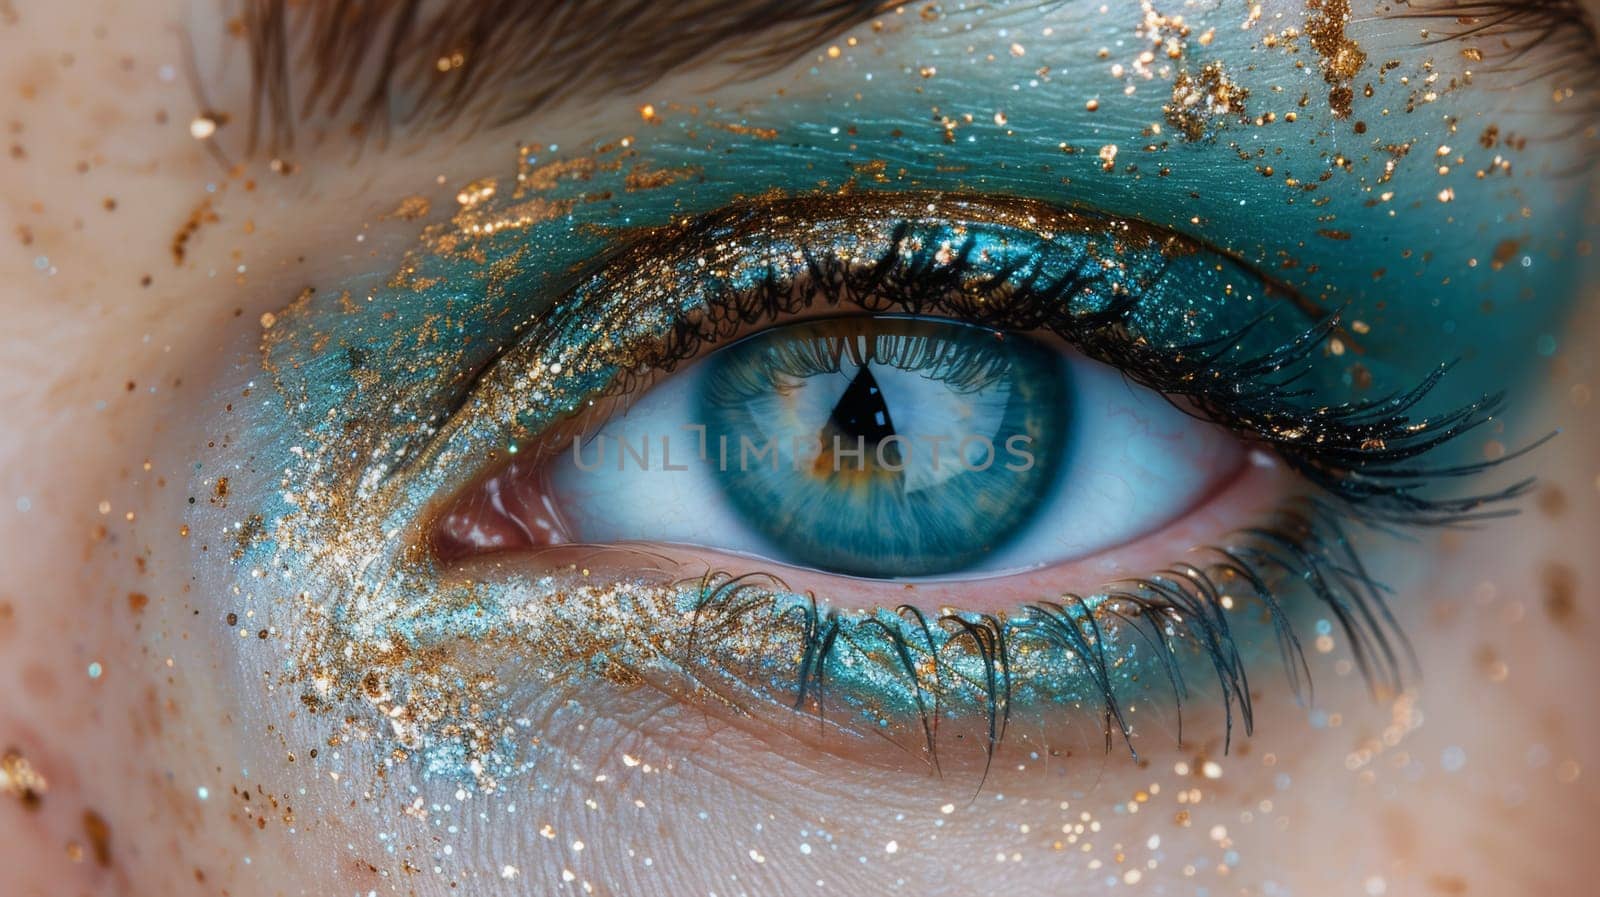 A close up of a woman's eye with glitter on it